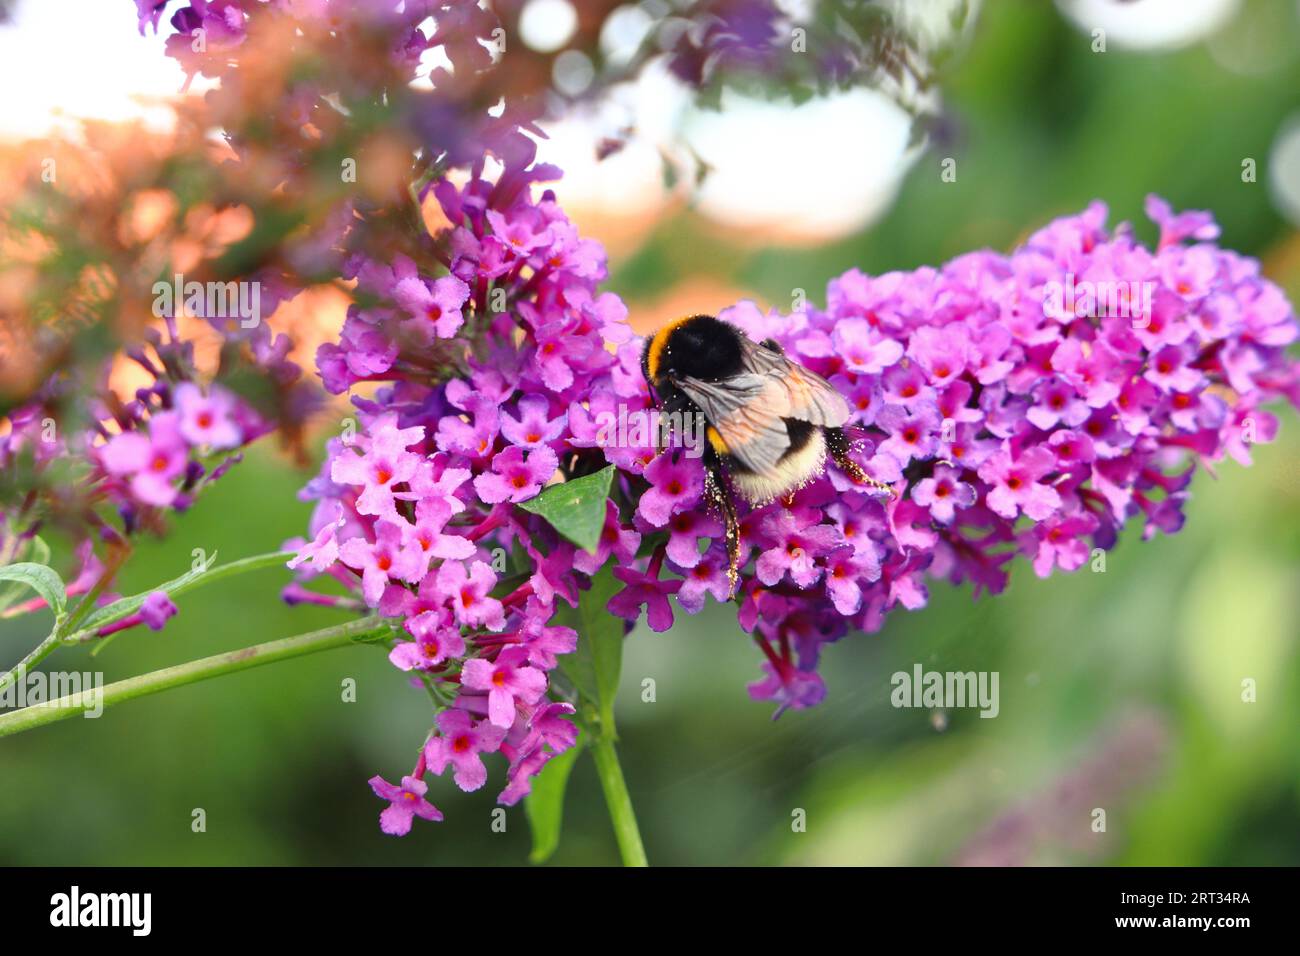 Bumble bee on Flower Stock Photo